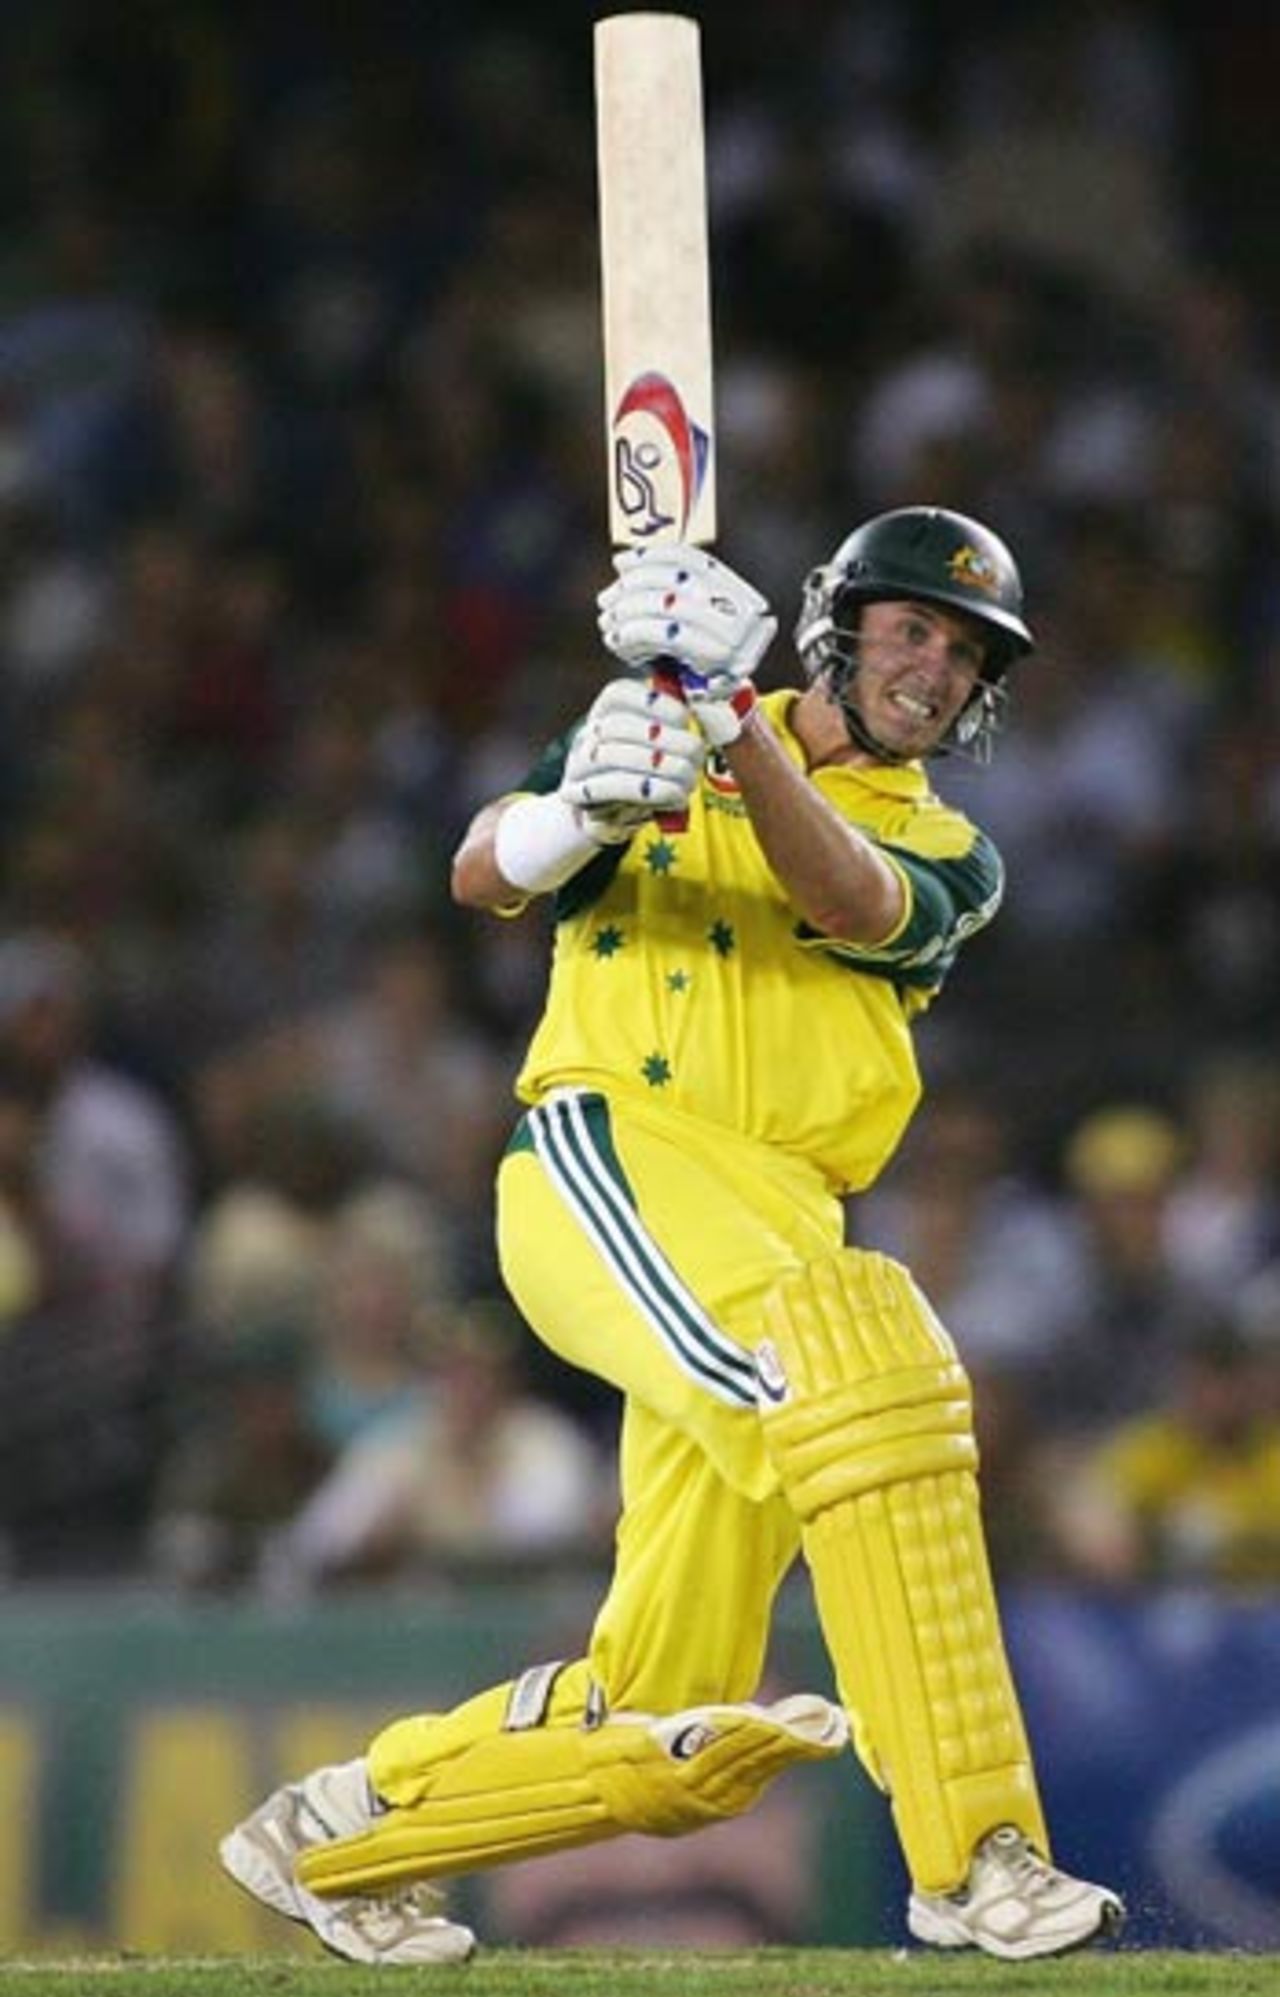 Mike Hussey continues to dazzle, Australia v South Africa, VB Series, Melbourne, February 3, 2006